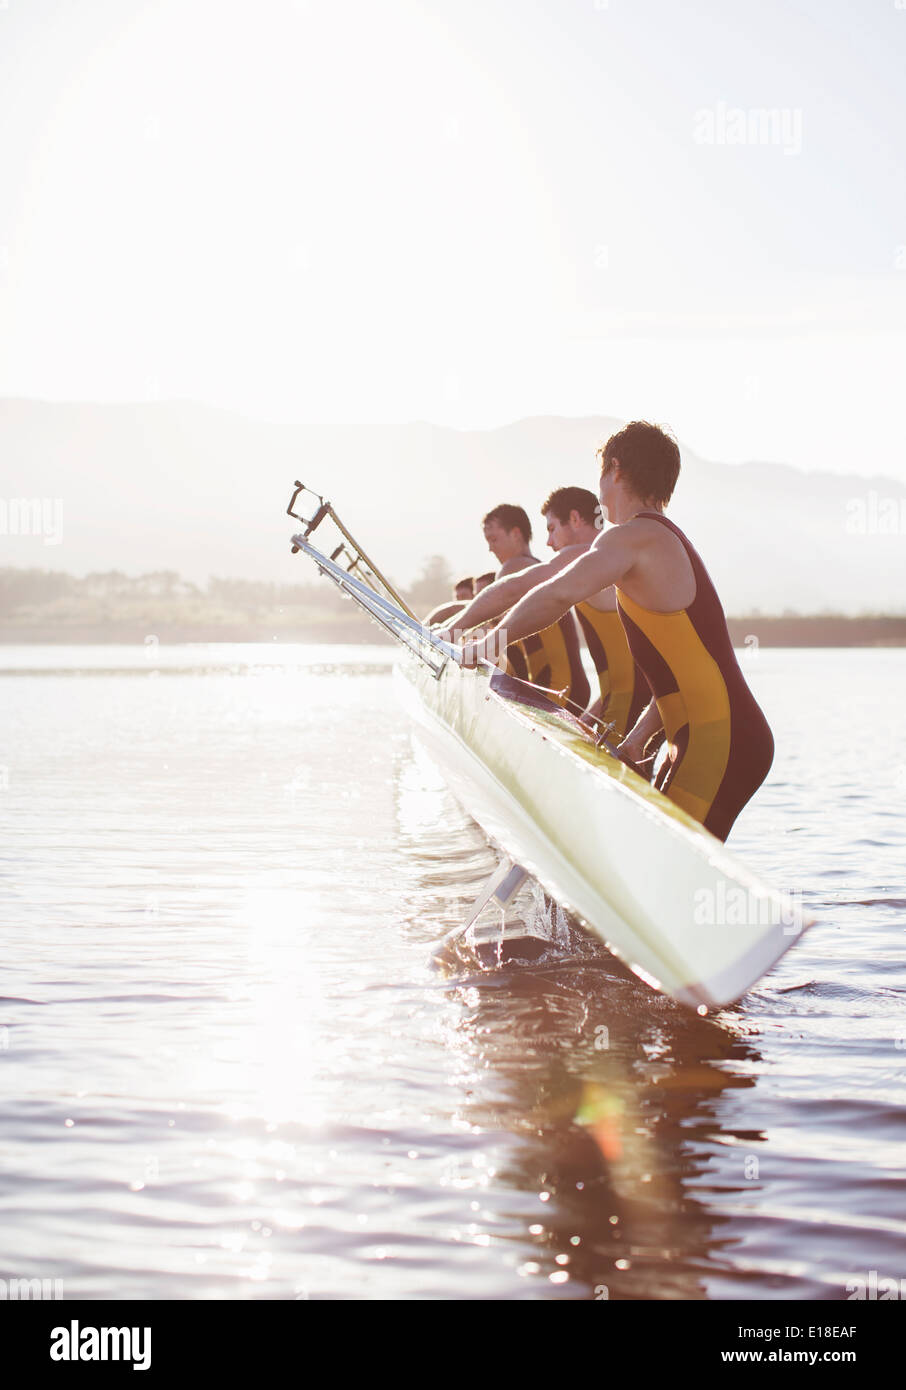 Rowing team placing boat in lake Stock Photo